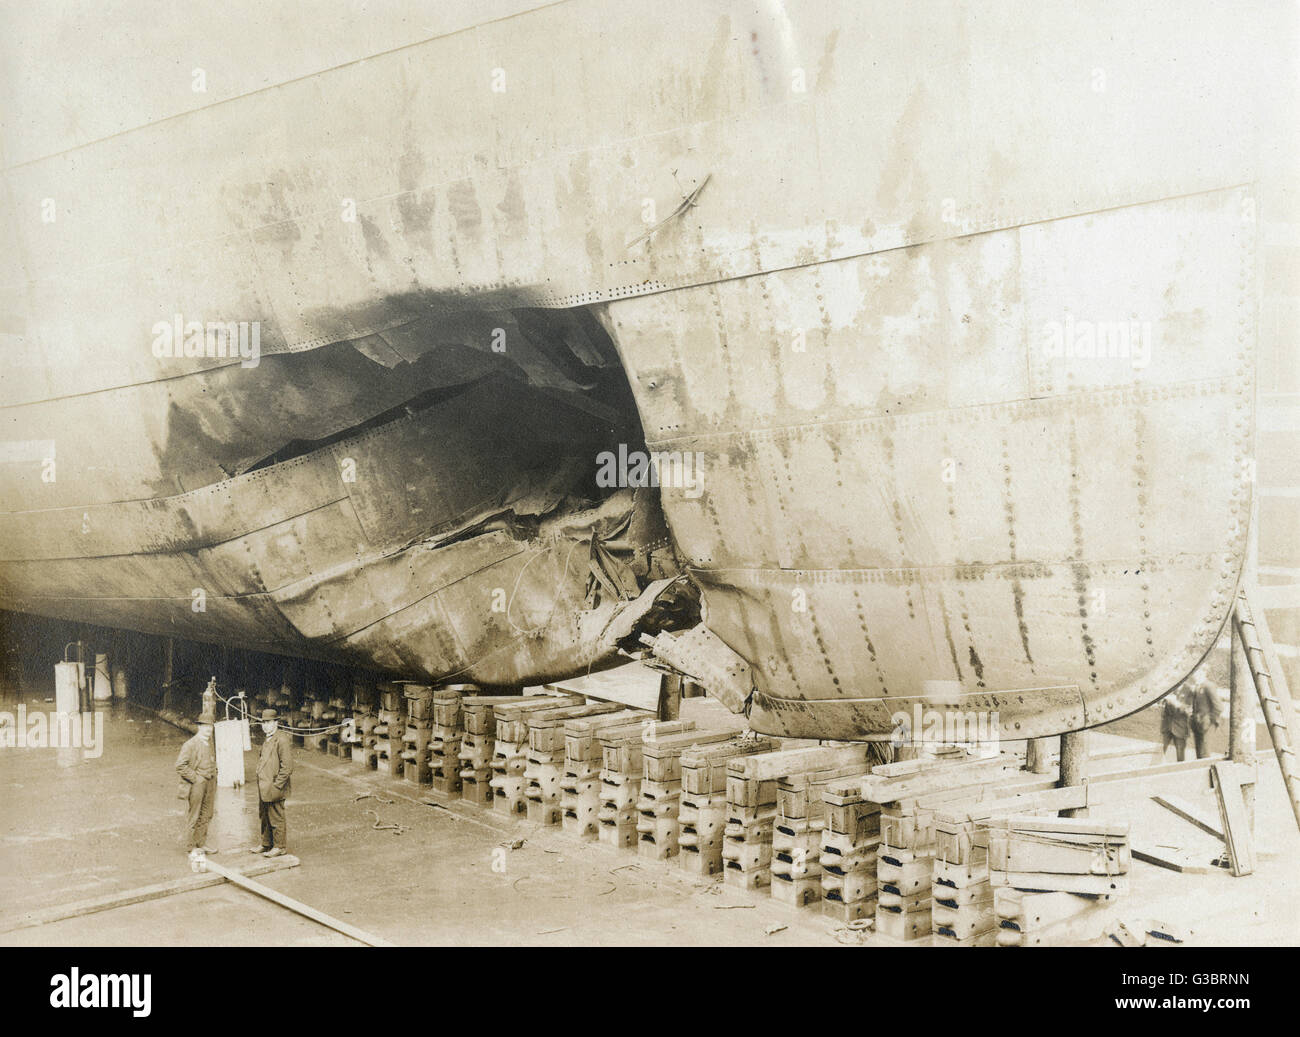 Ship in dry dock with damaged hull Stock Photo